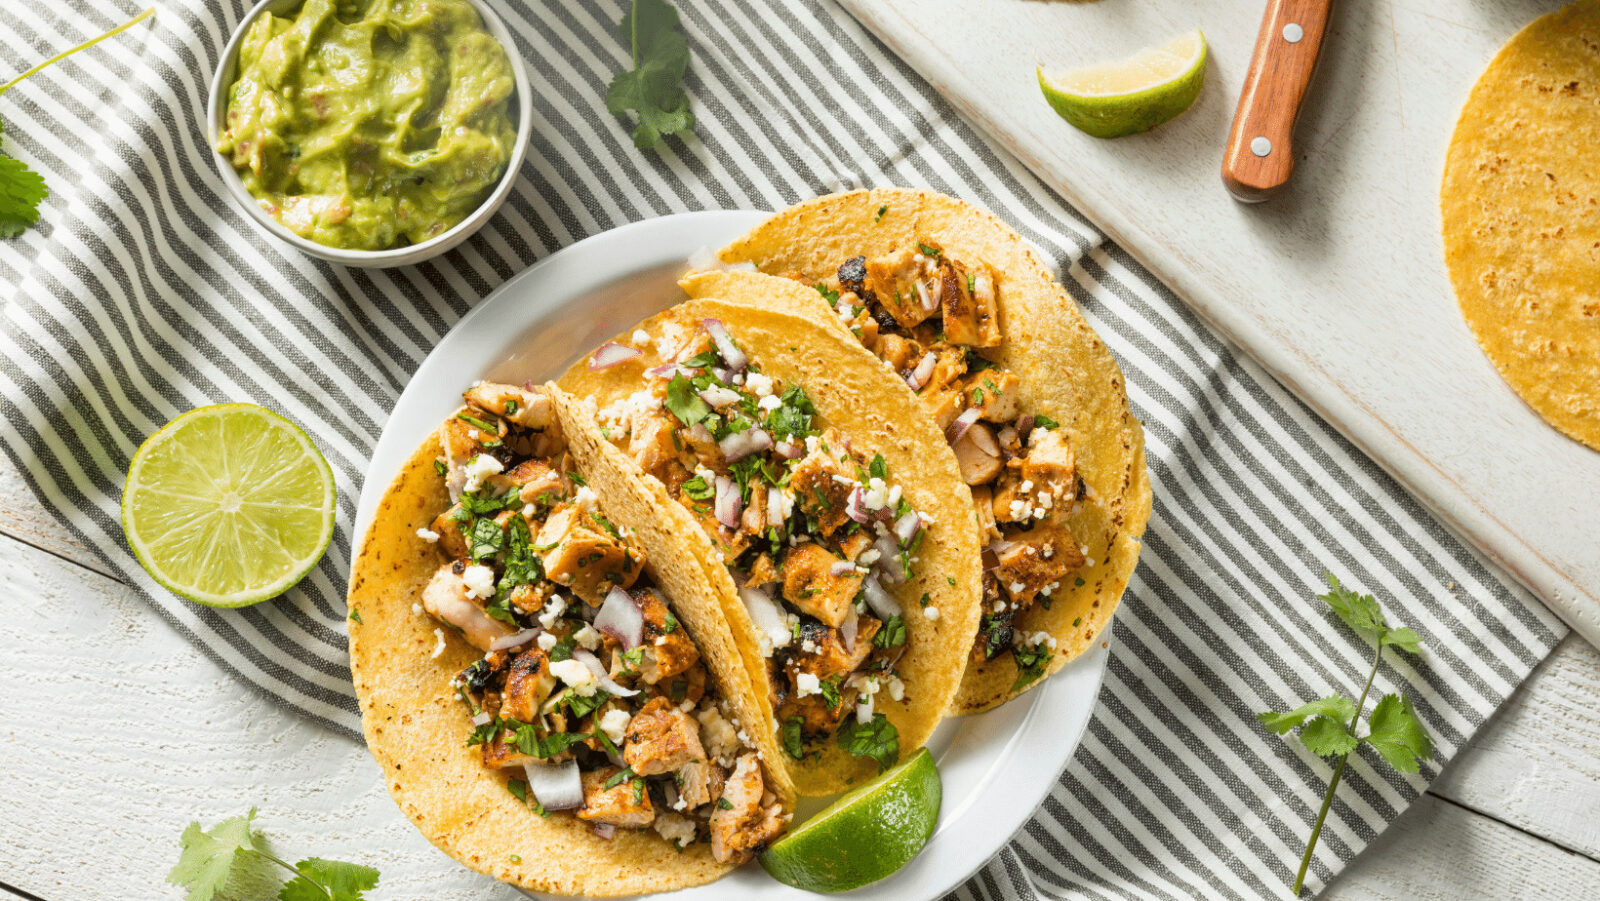 Chicken Sausage Tacos with Cilantro Lime Sauce